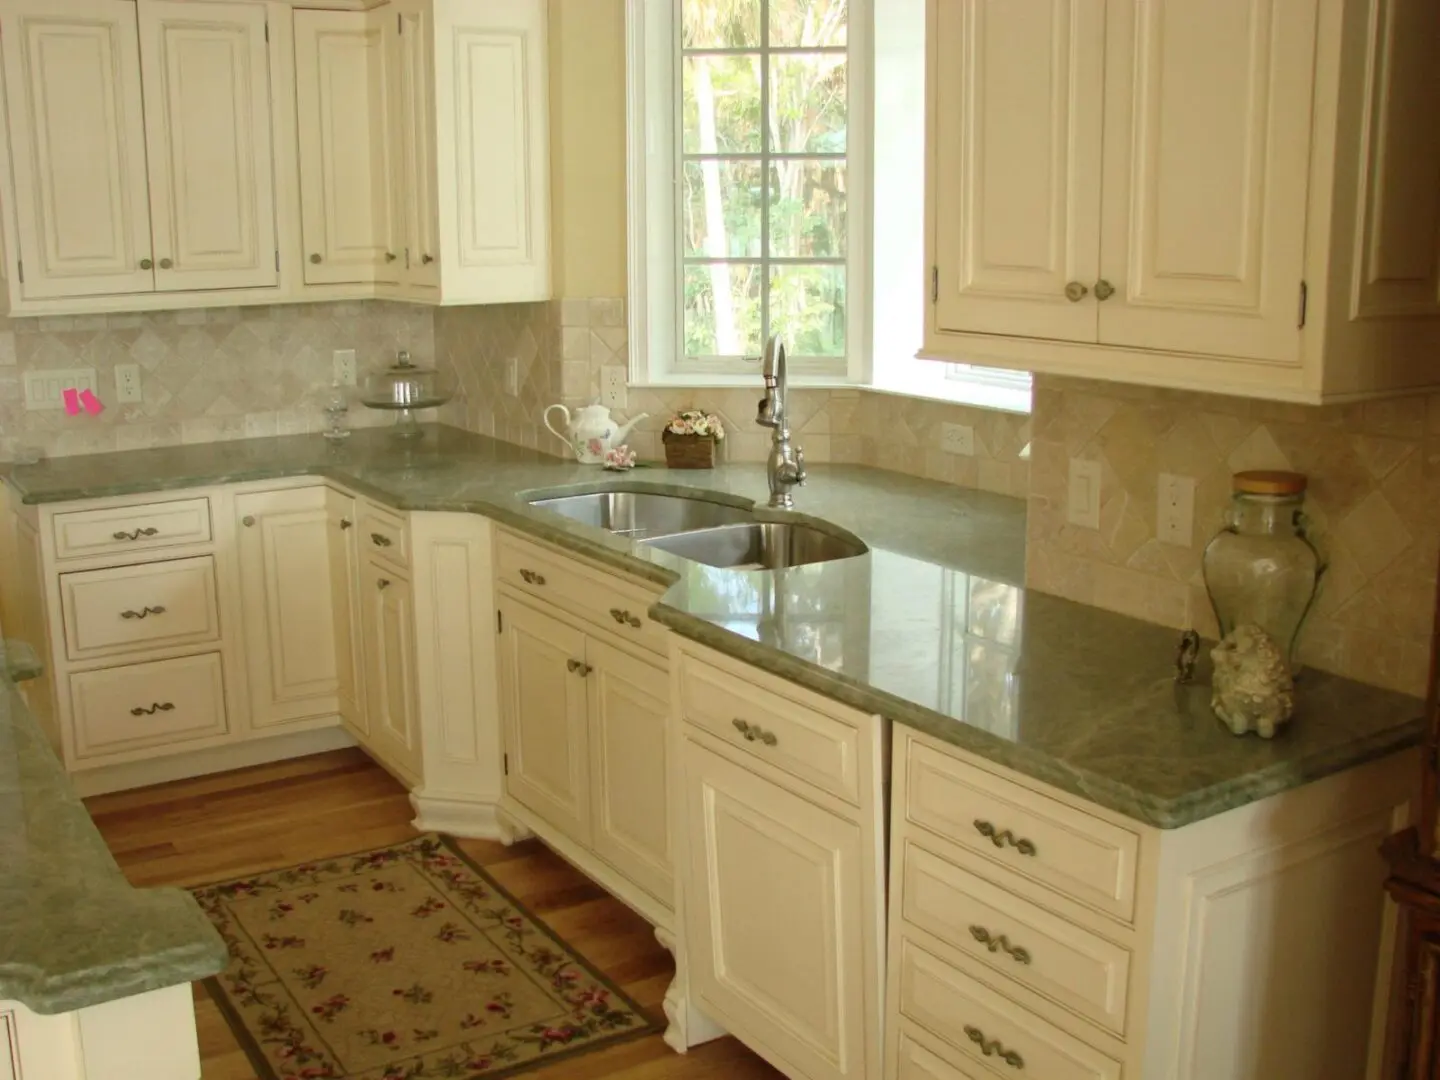 A bright kitchen interior with beige cabinetry and green granite countertops.